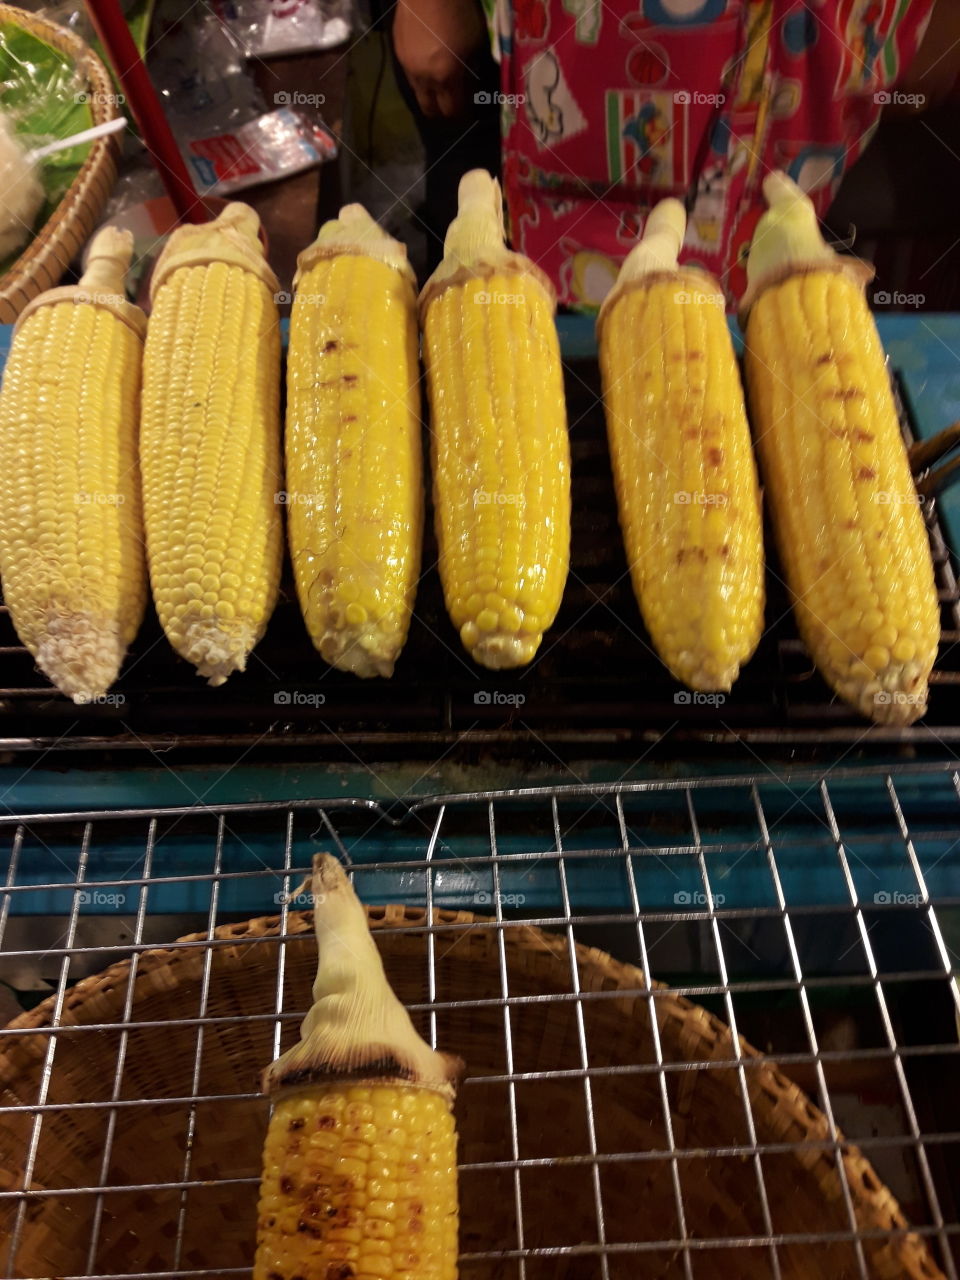 the corn after roasted until they are ripe. Their color become darker  and ready to eat.